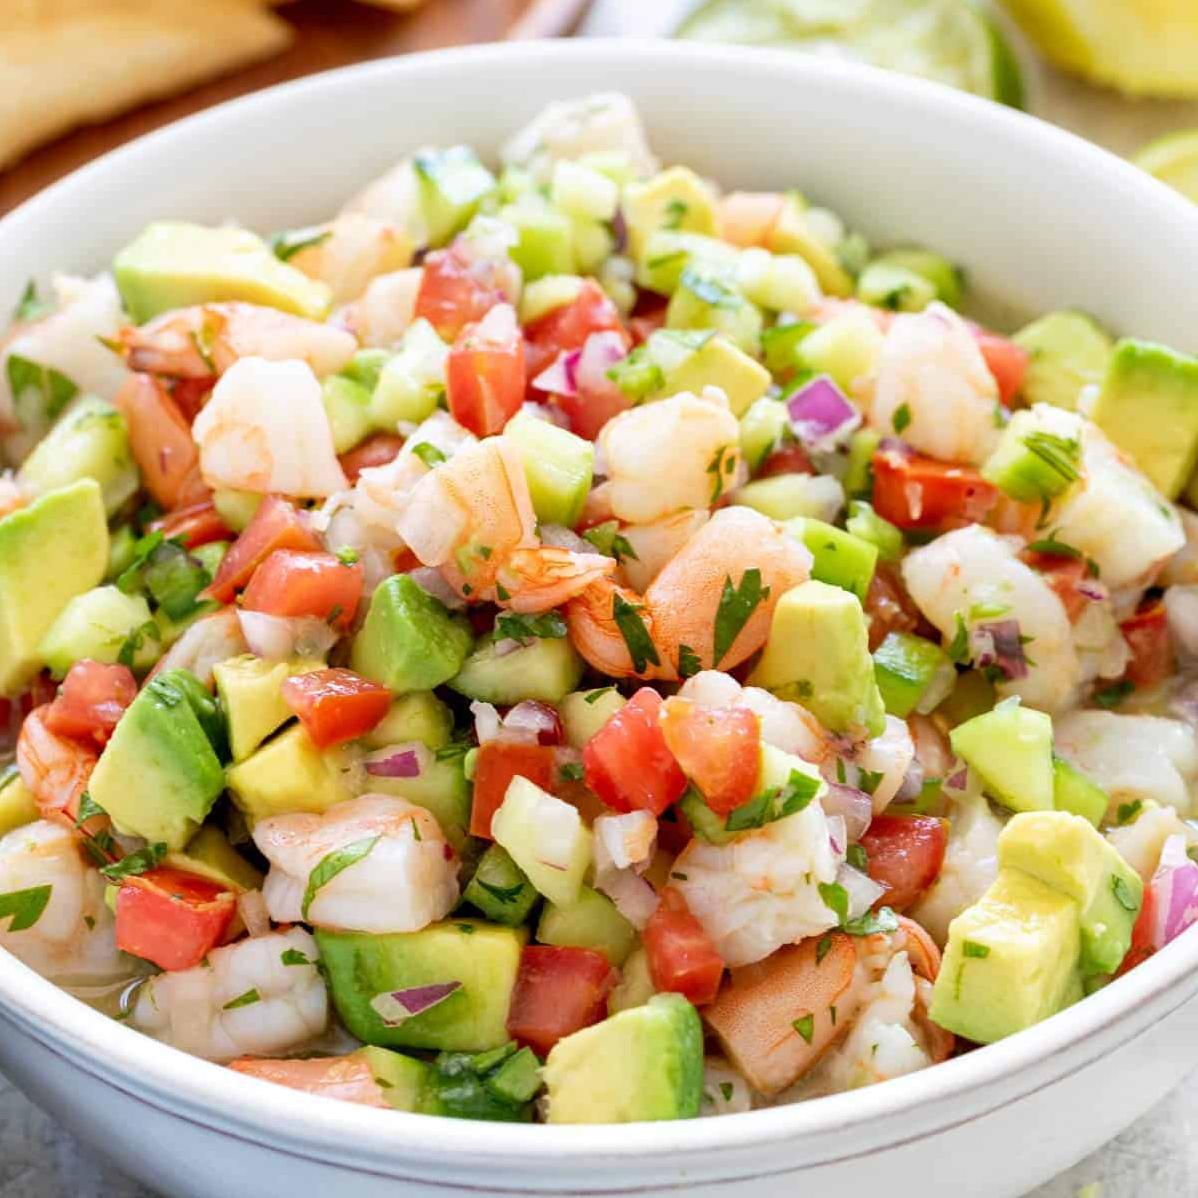  Get ready to take your taste buds on a trip to South America with this classic ceviche recipe.